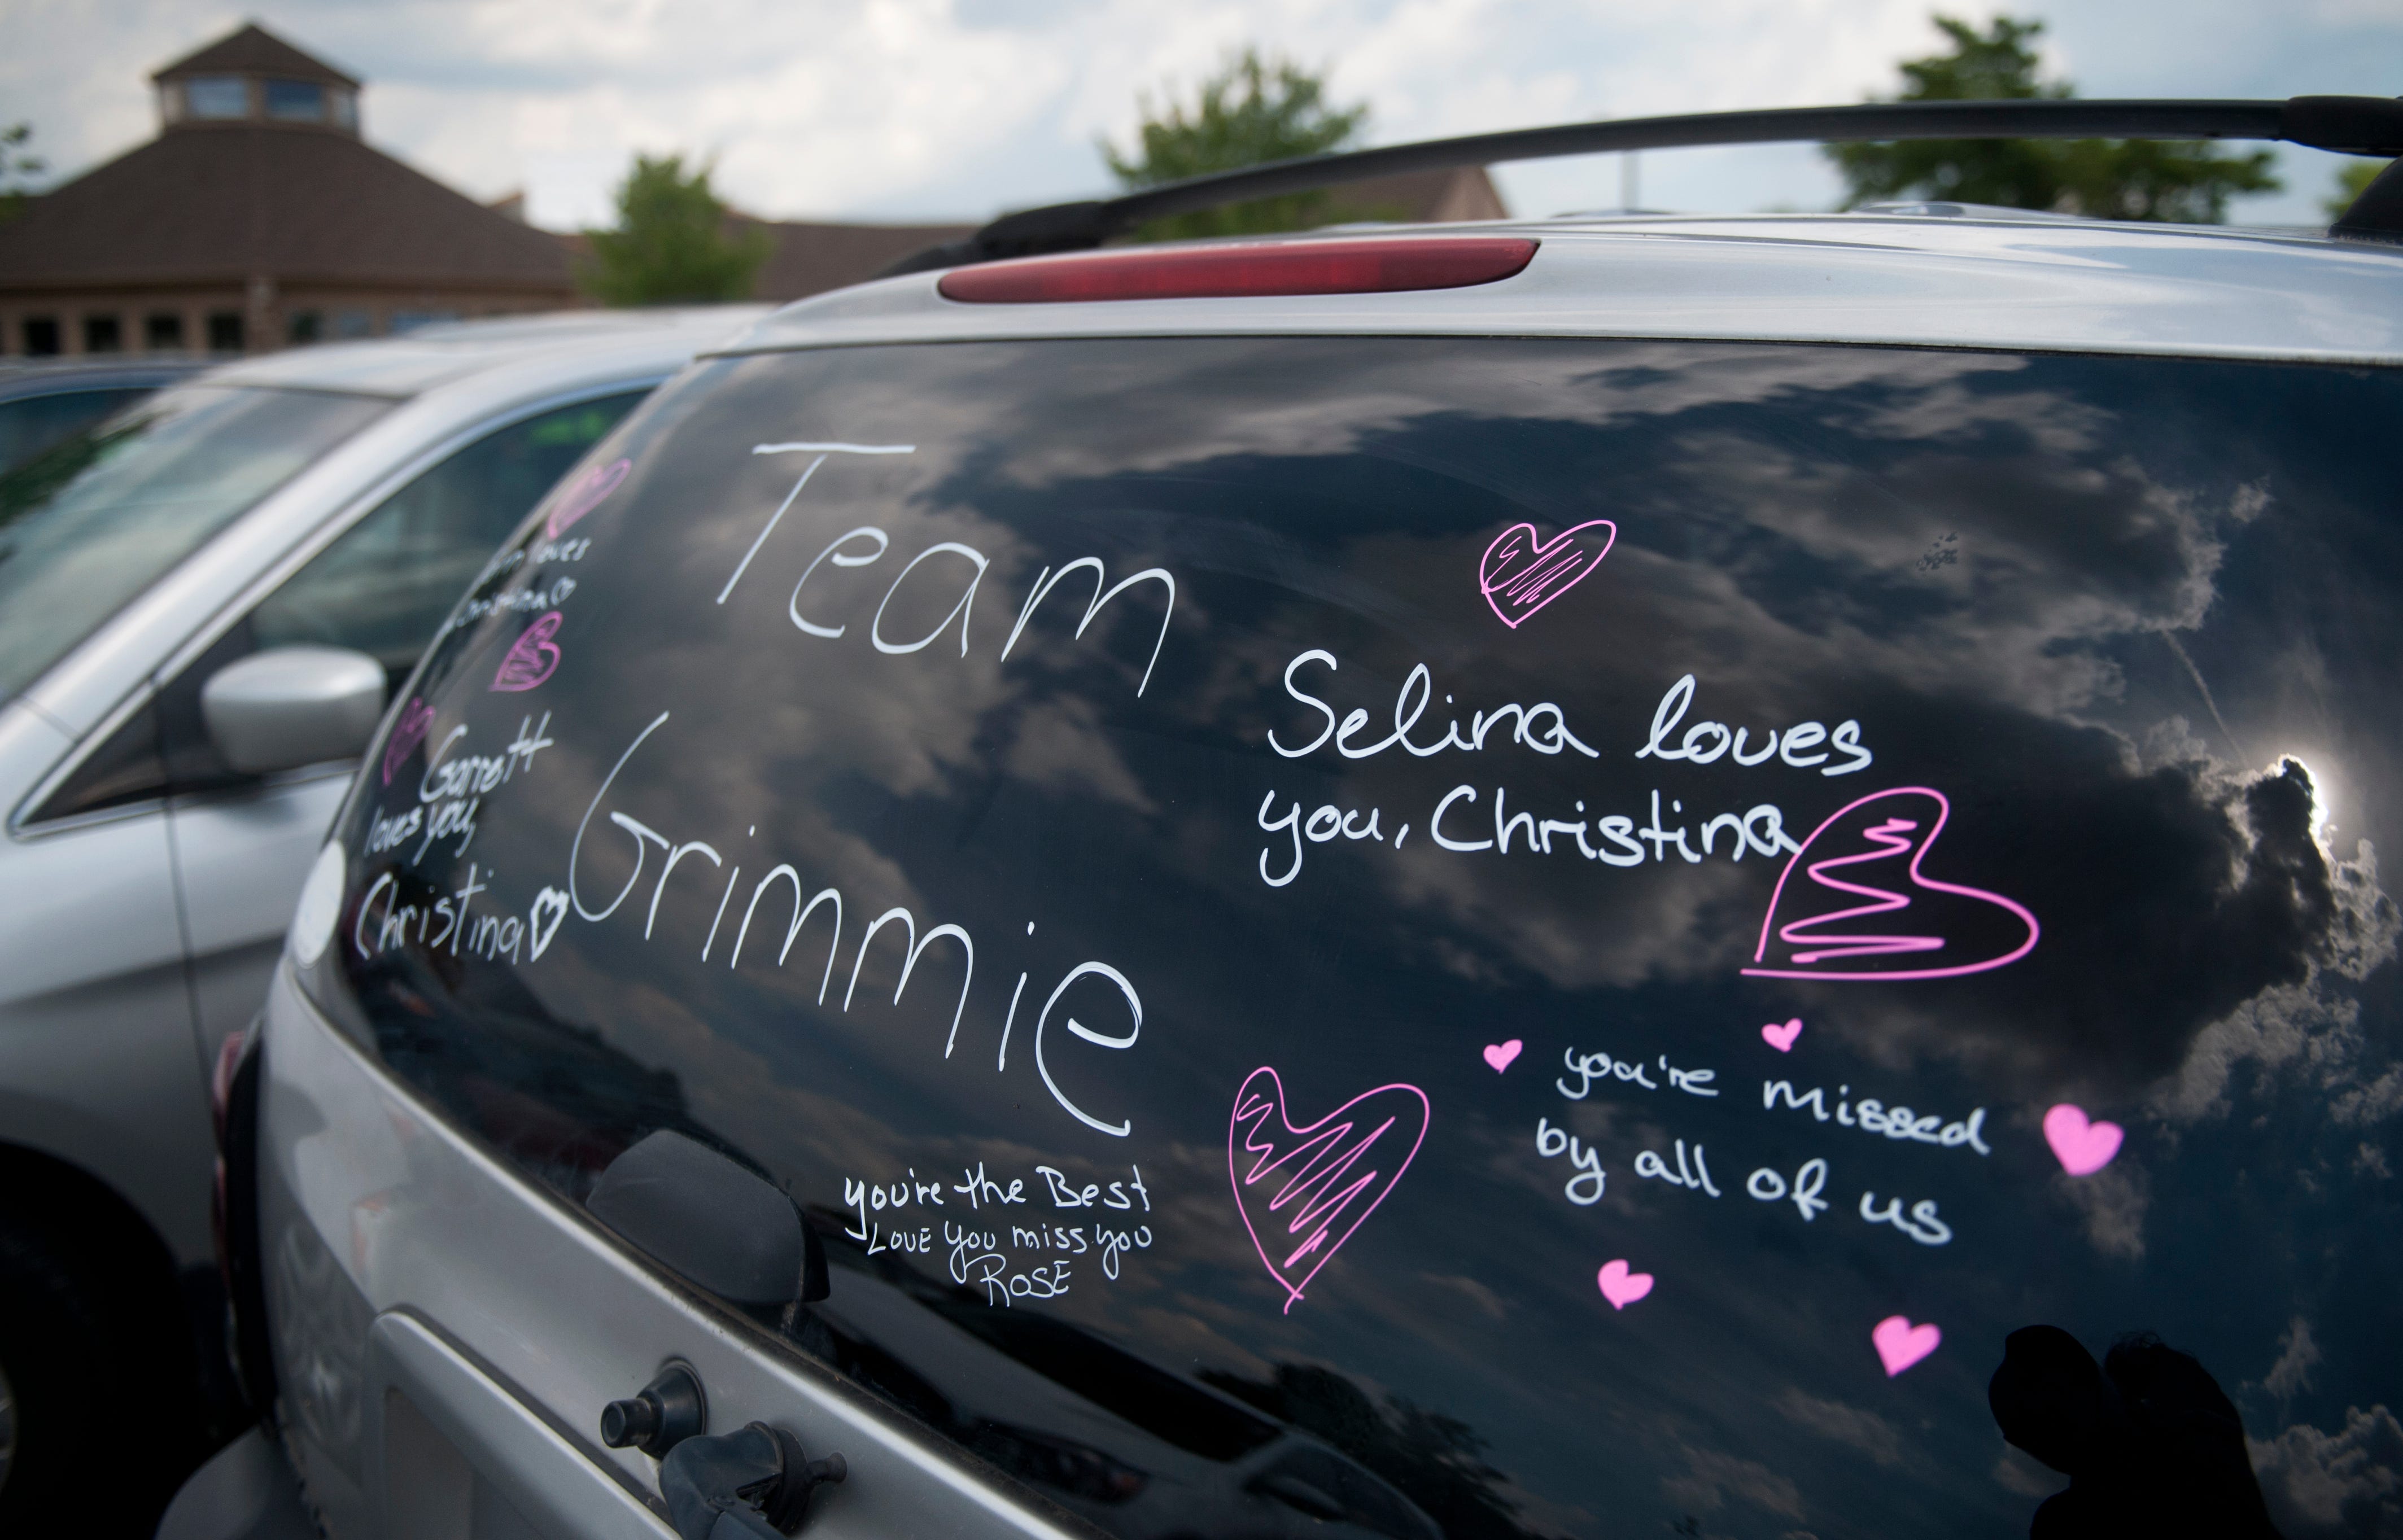 Messages for Christina Grimmie on a vehicle outside Fellowship Alliance Chapel in Medford during her viewing in 2016.